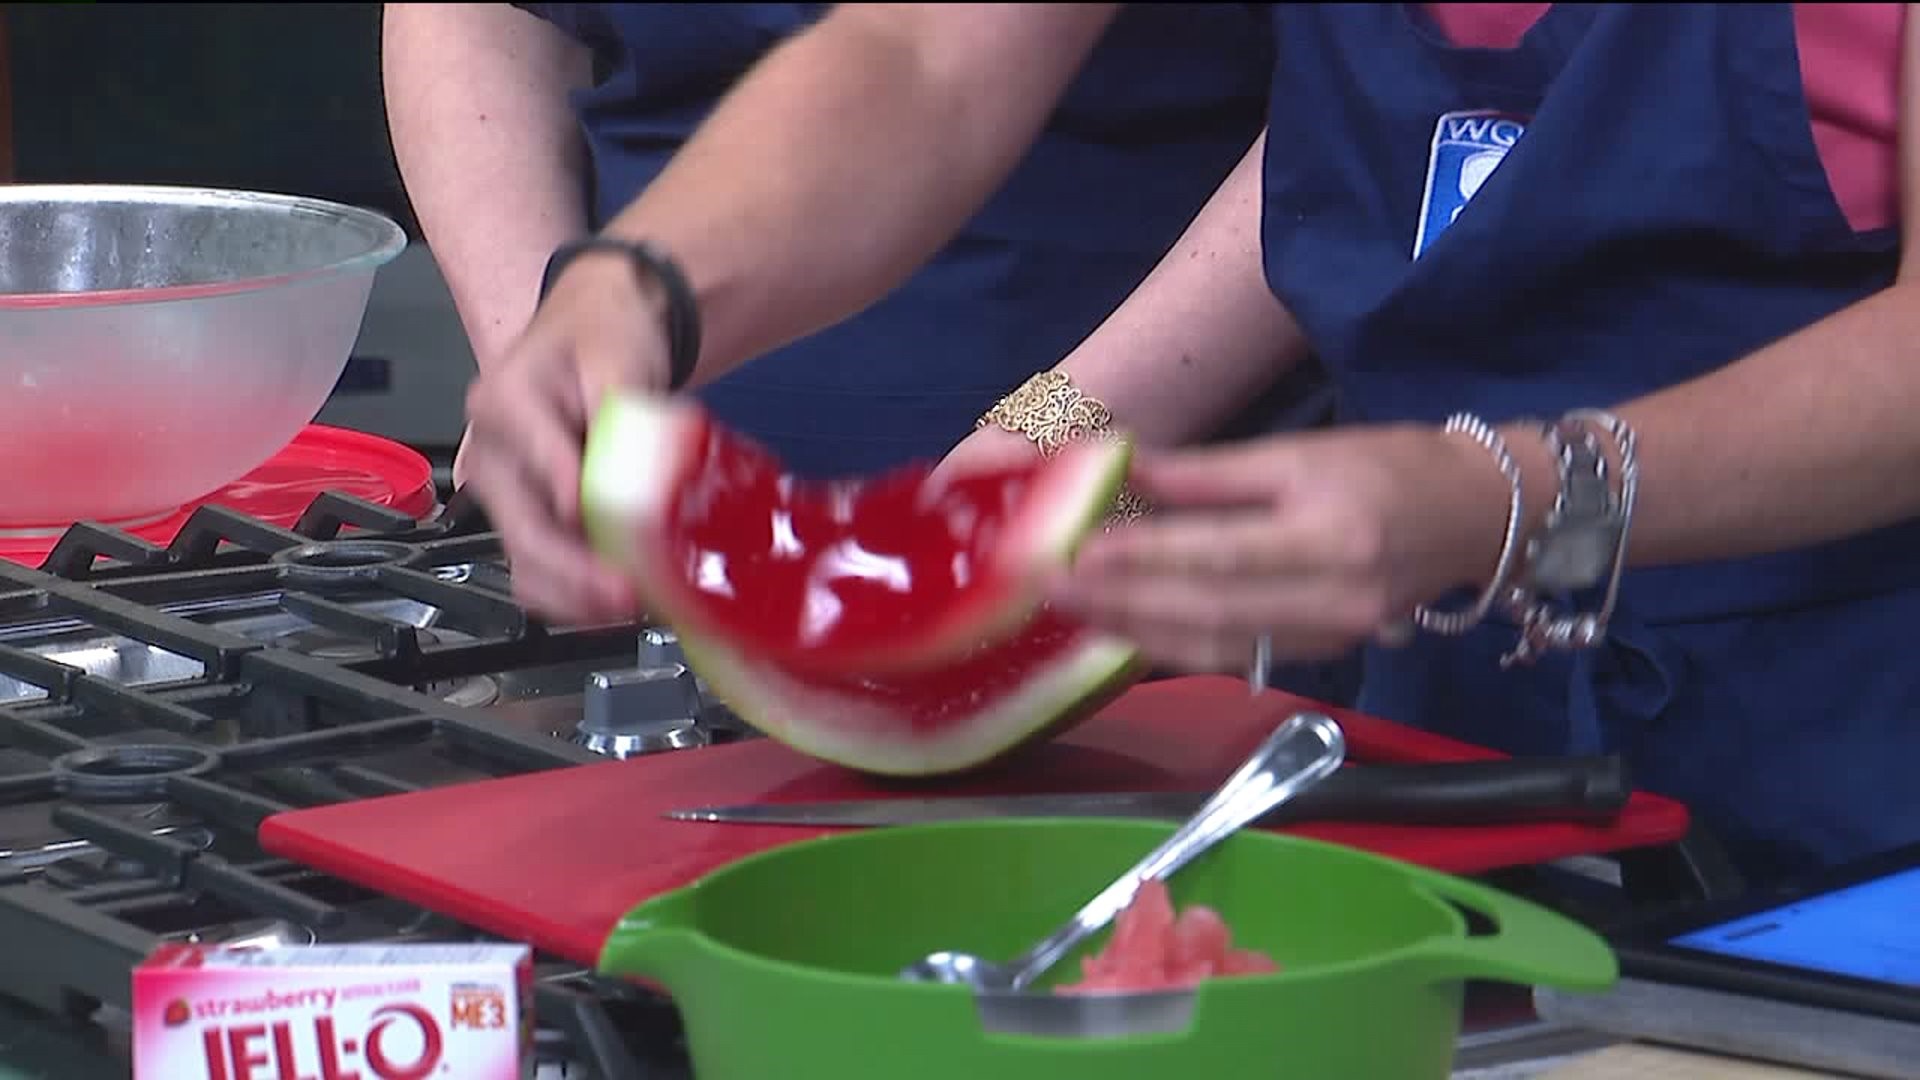 Nailed It Or Failed It: Watermelon Jell-O Slices Part 2